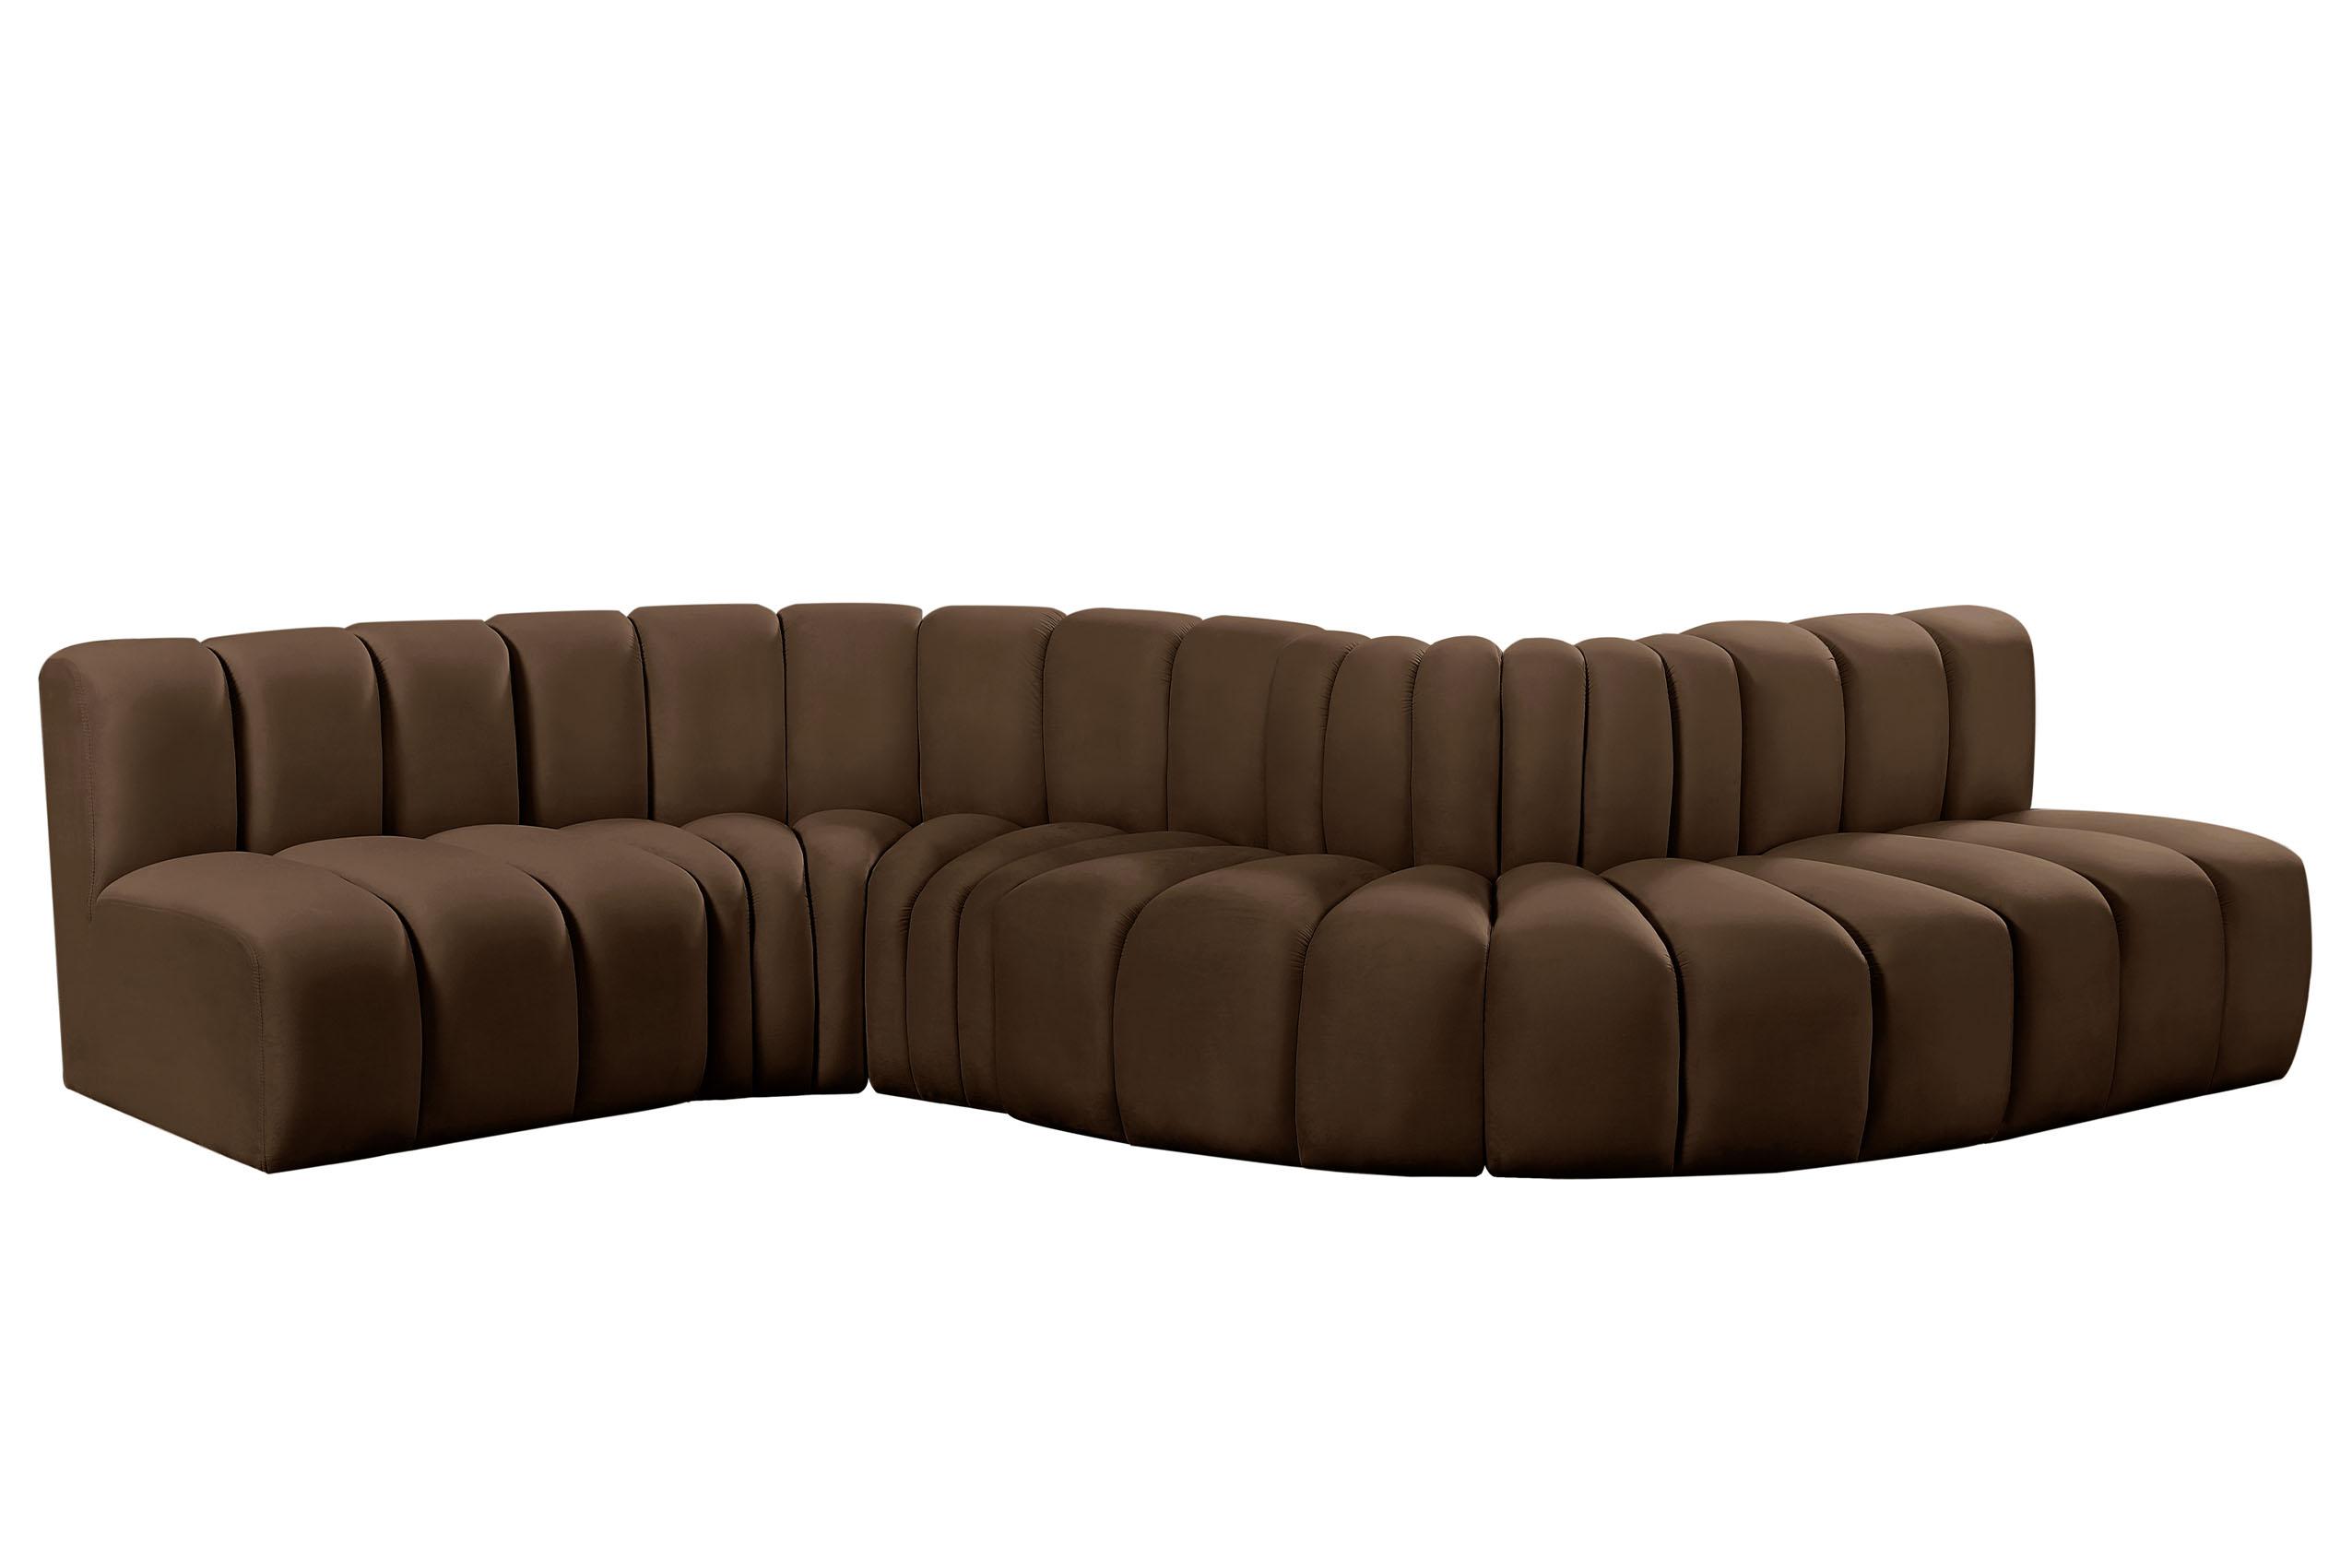 Contemporary, Modern Modular Sectional Sofa ARC 103Brown-S6A 103Brown-S6A in Brown Velvet